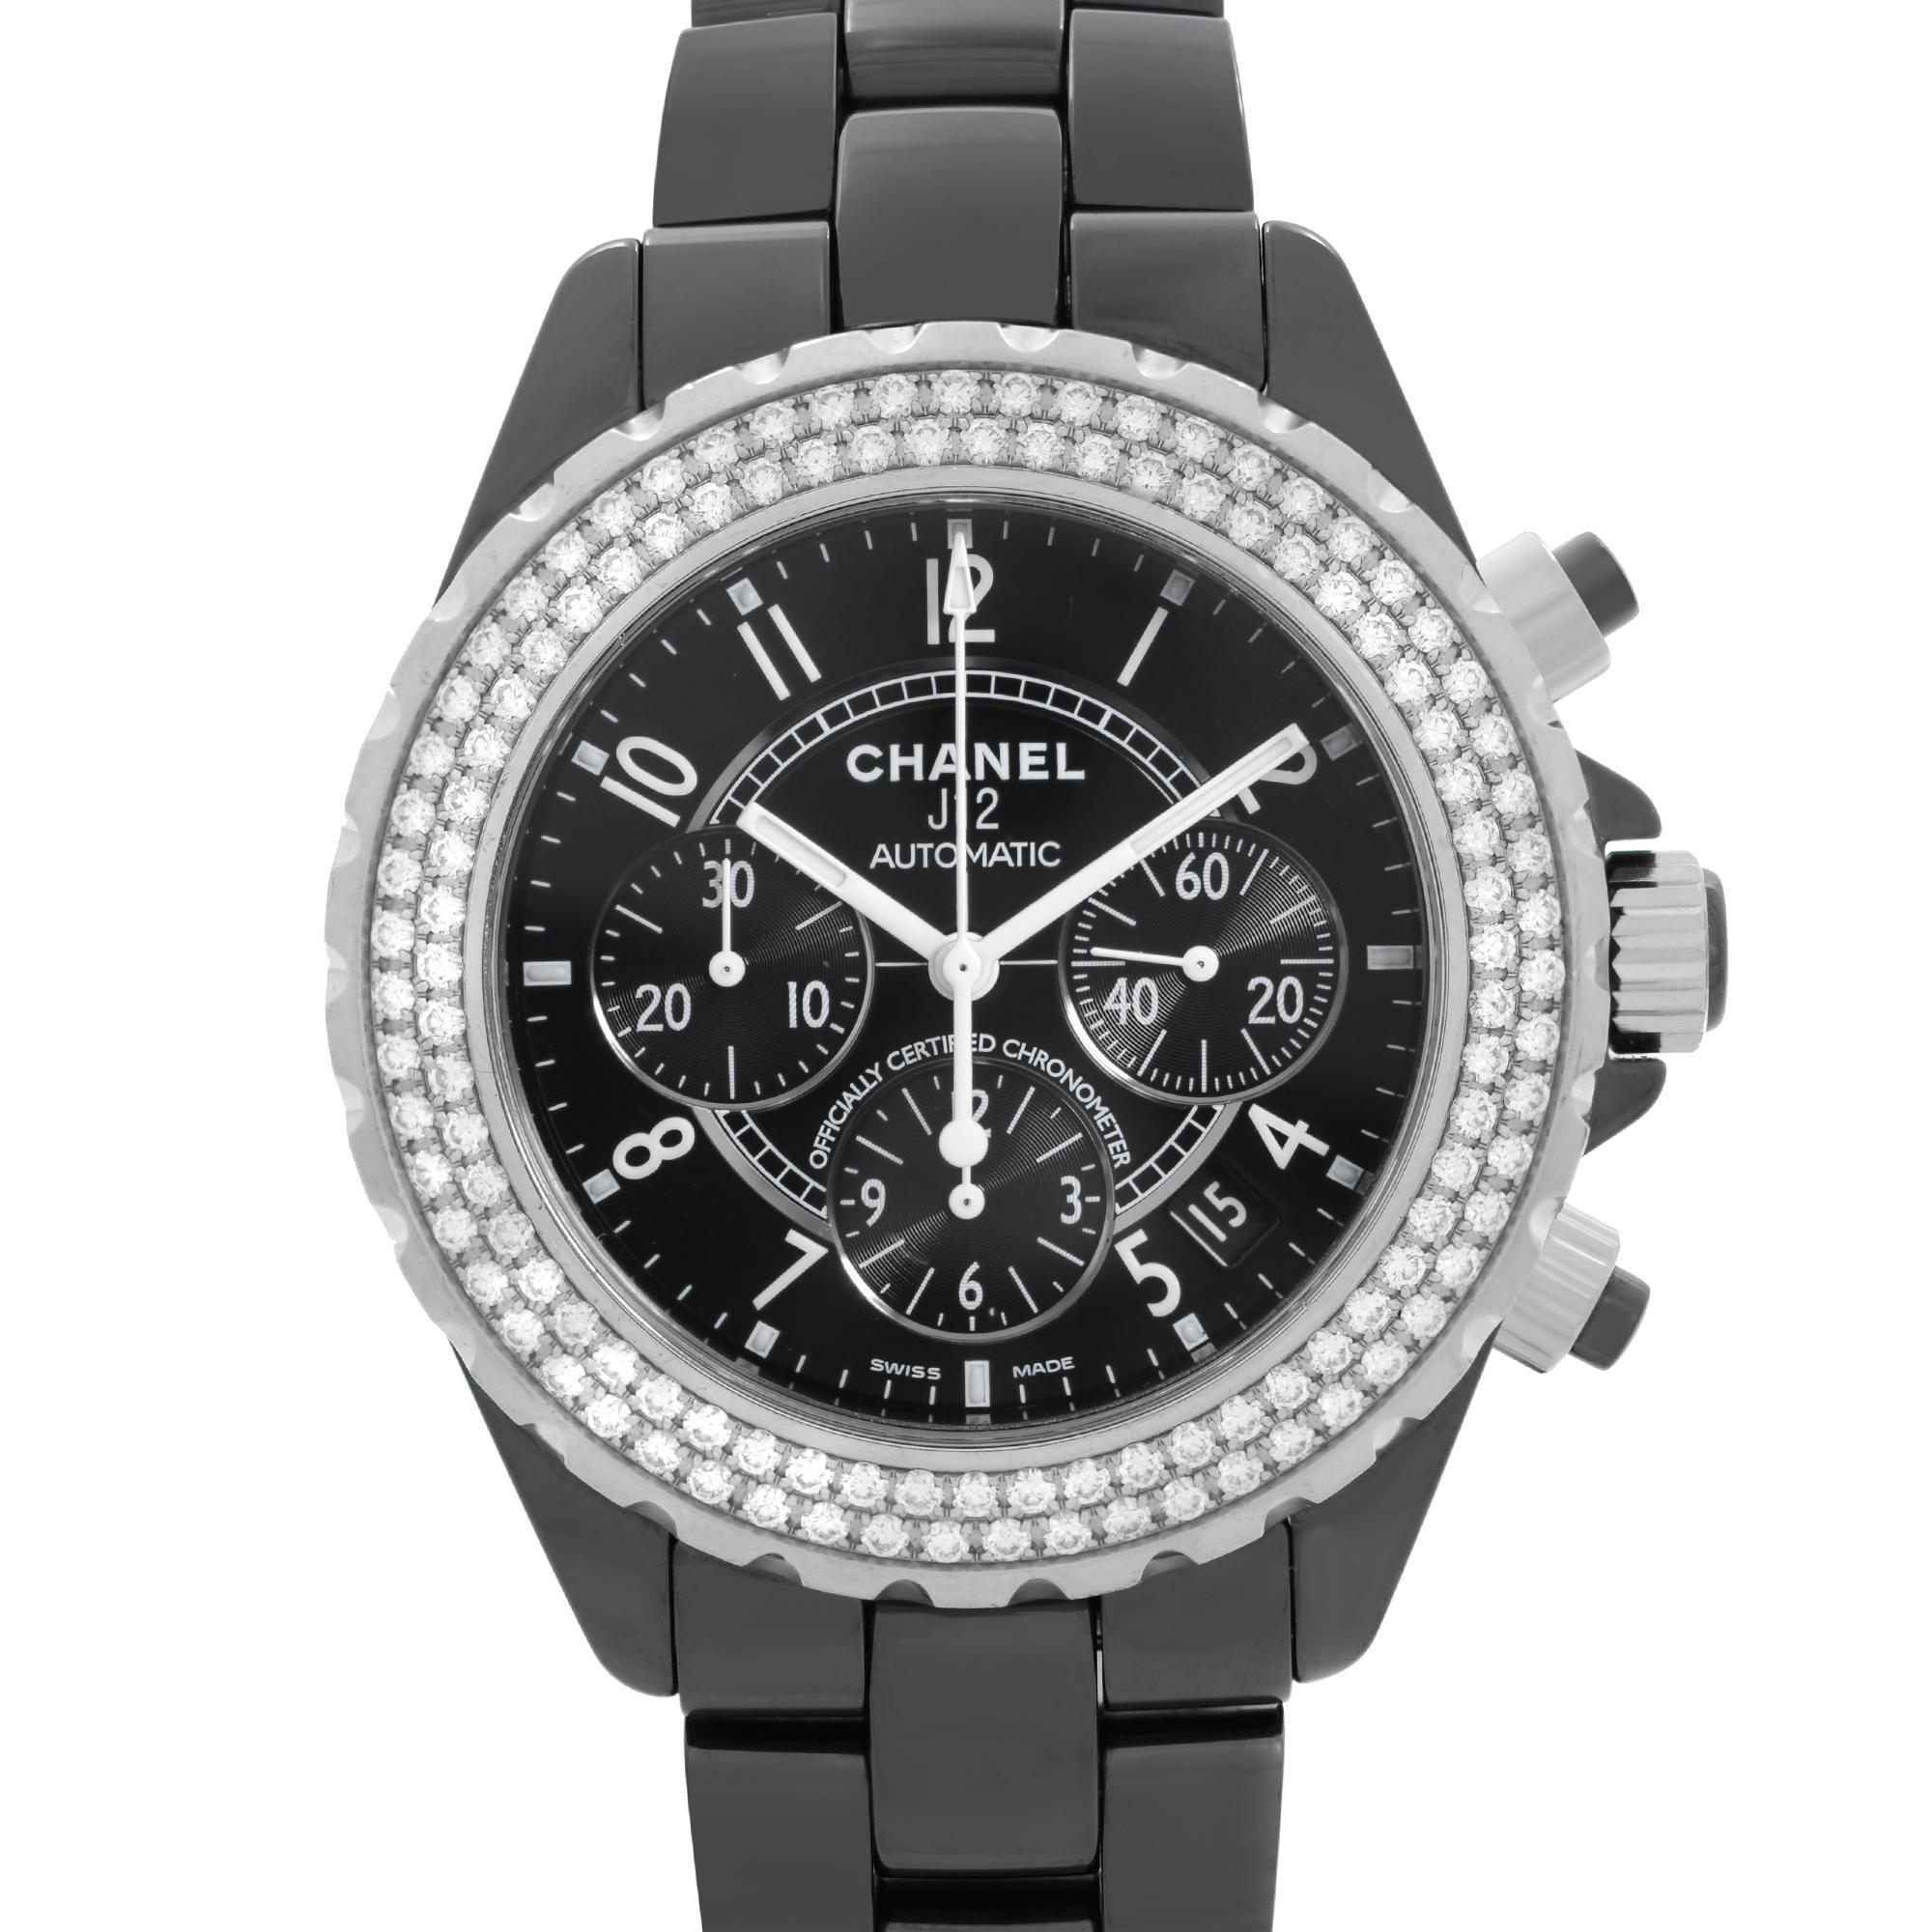 Pre-owned Chanel J12 41mm Black Ceramic Chronograph Diamond Automatic Mens Watch H1009. Minor Scratches on the Ceramic Case and Bracelet Under Closer Inspection. This Beautiful Timepiece is Powered by an Mechanical (Automatic) Movement and Features: